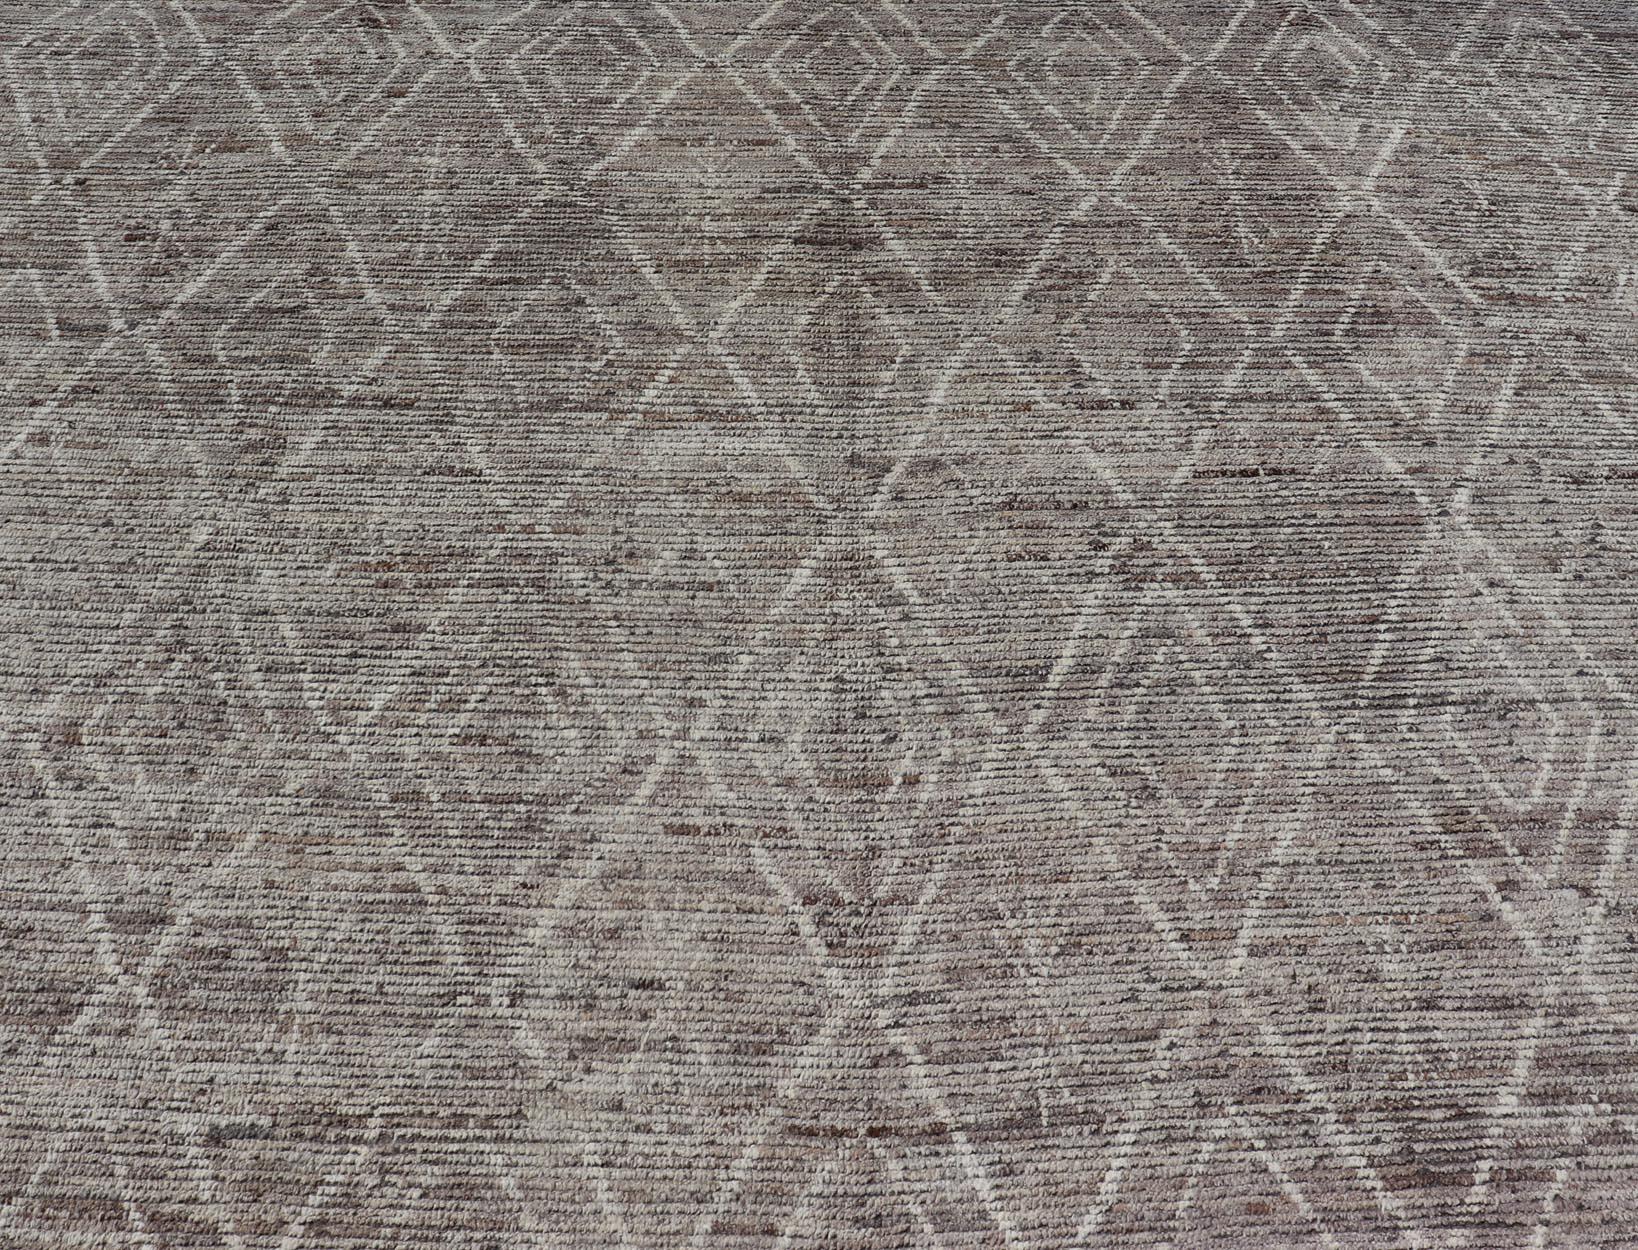 Afghan Modern Causal Contemporary Rug in Moroccan Design in Variegated Gray and Cream